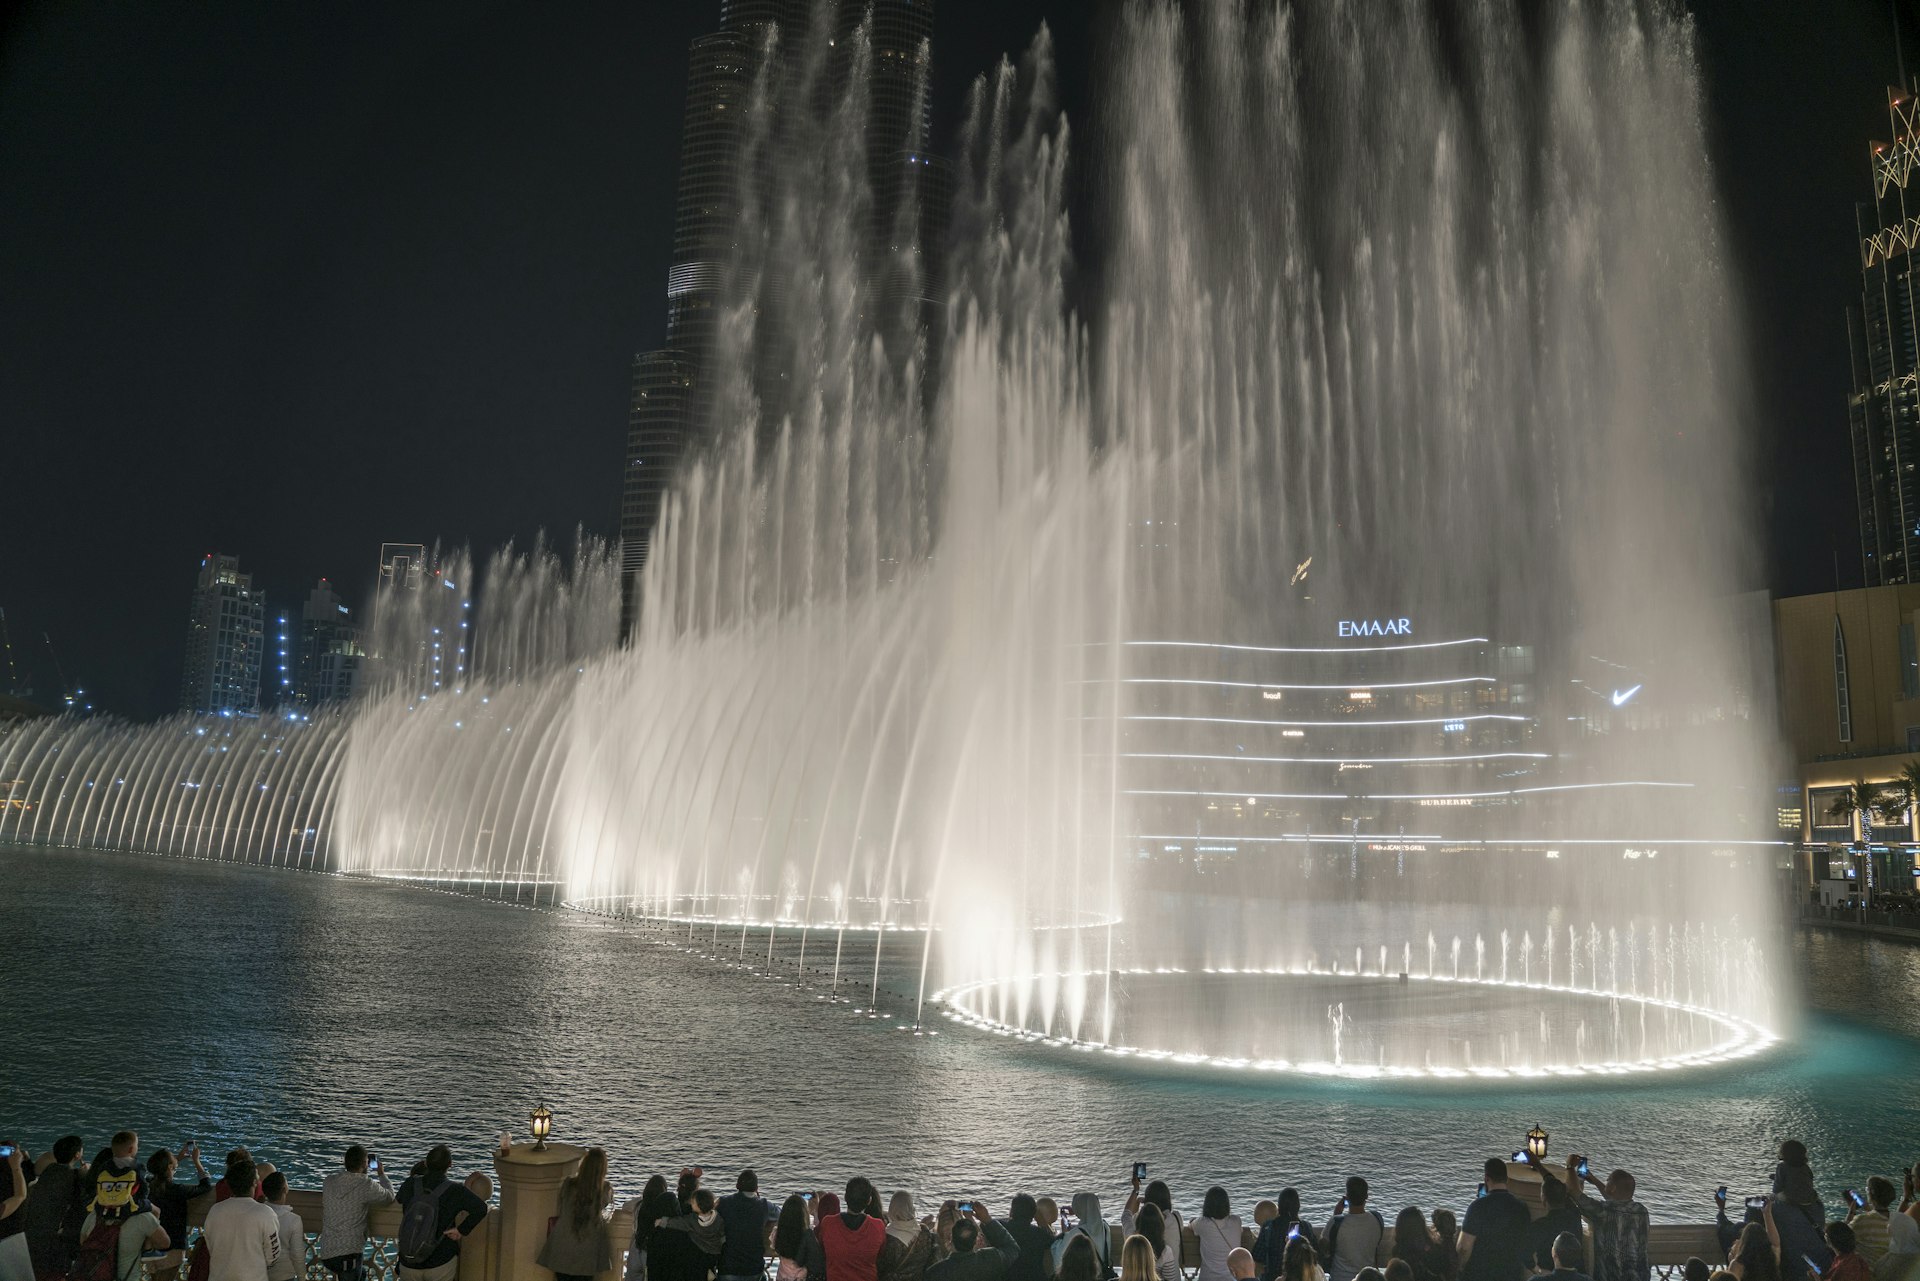 People watching the display at the Dubai Fountain